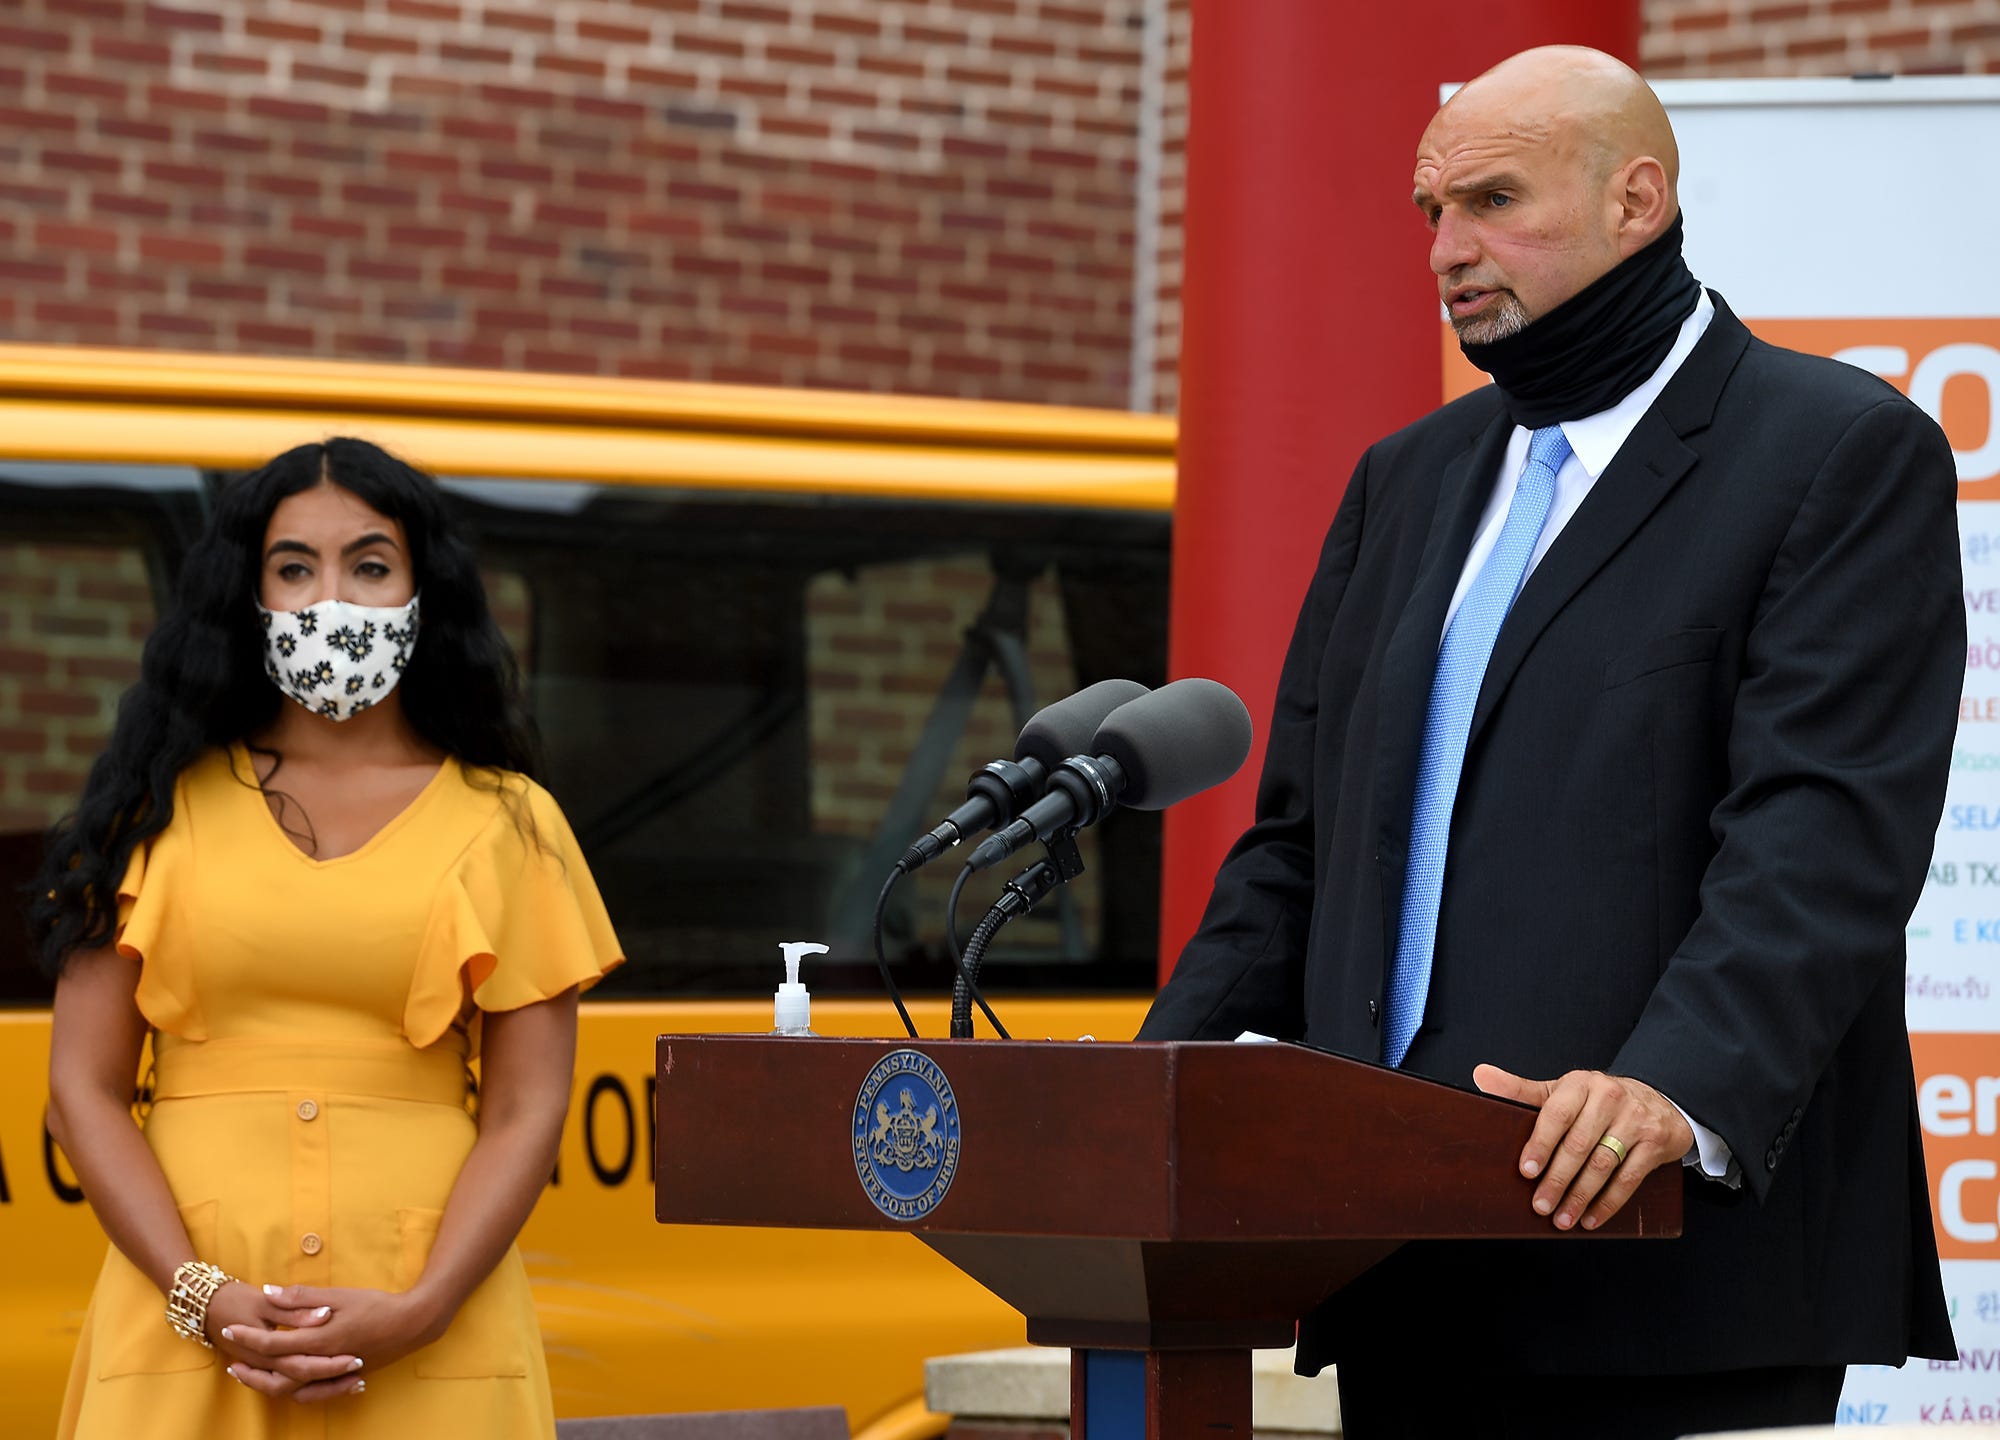 Lieutenant Governor John Fetterman, along with Second Lady Gisele Fetterman, left, visit the York County YMCA to announce the findings of the Wolf Administration’s COVID-19 Response Task Force for Health Disparity, Thursday, August 13, 2020.
John A. Pavoncello photo